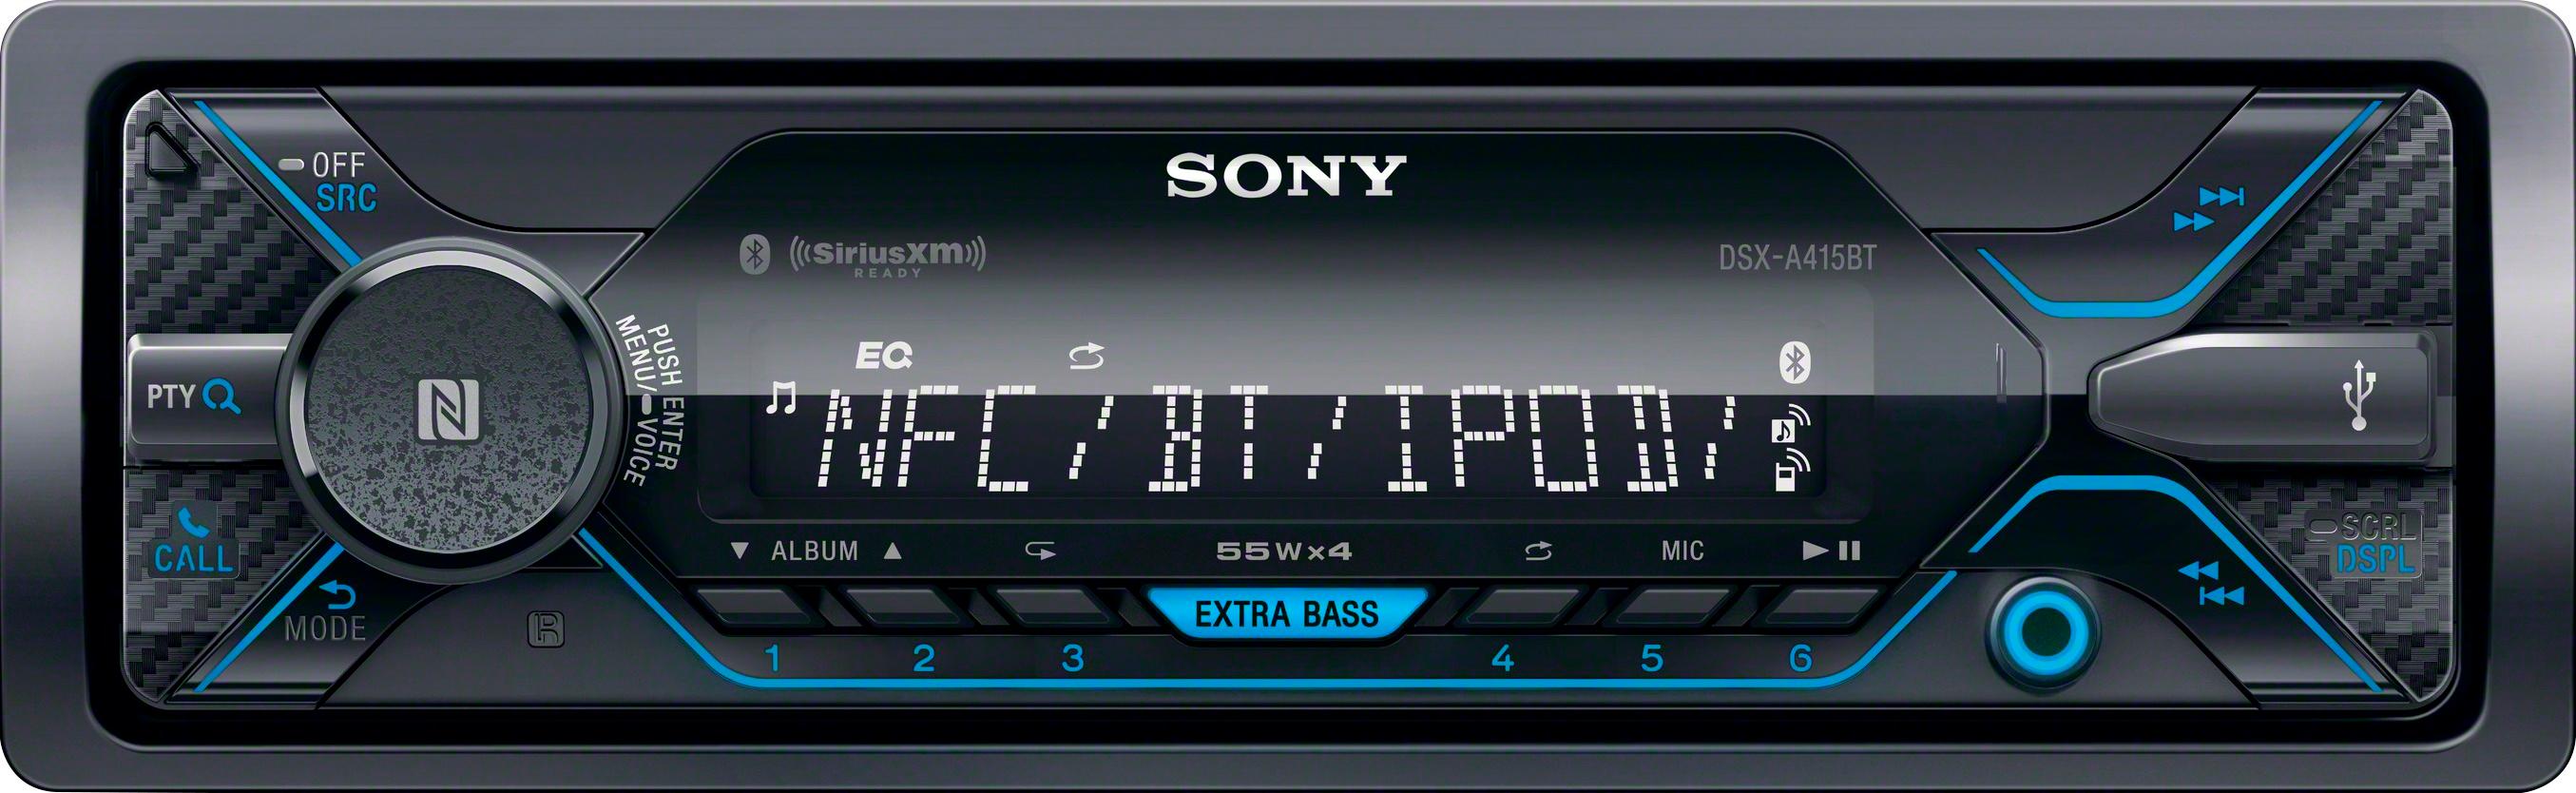 Sony DSX-A415BT Single DIN Bluetooth In-Dash Digital Media Car Stereo  Receiver with Front 3.5 & USB Auxiliary Inputs NEW 